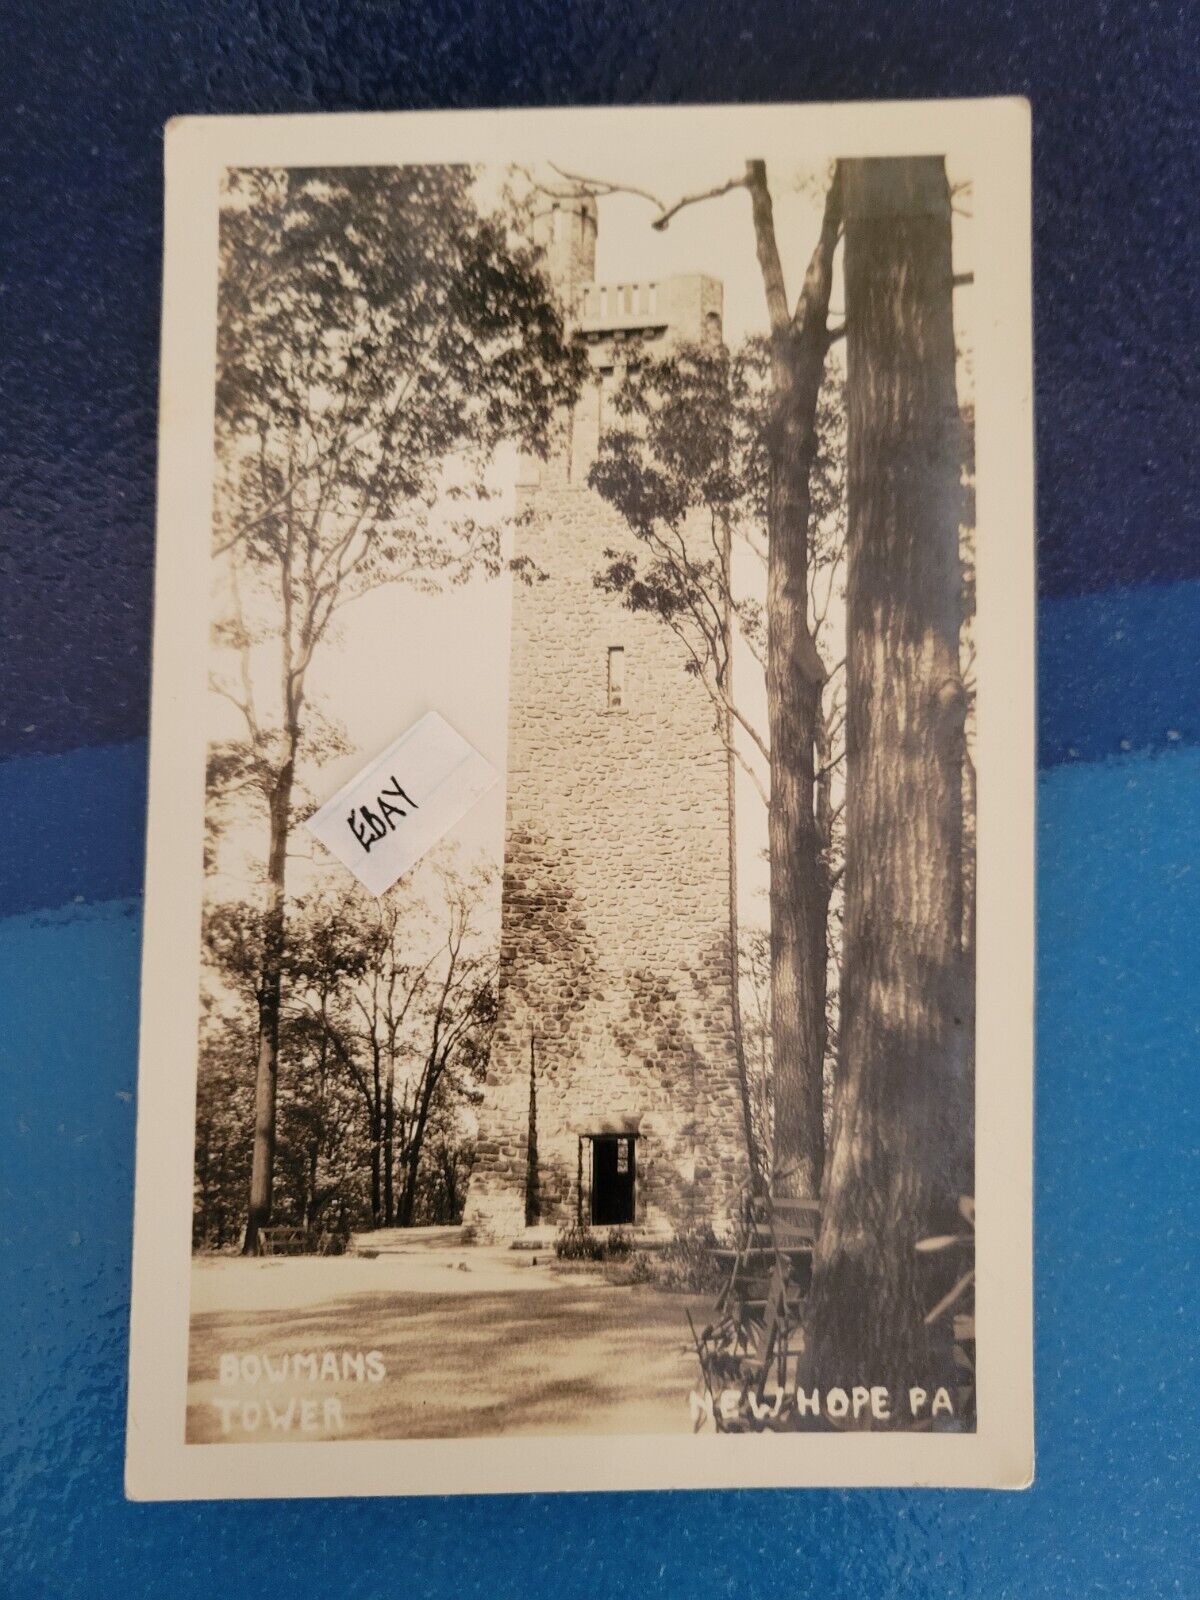 RPPC ca 1930 Bowman\'s Tower New Hope PA b/w photo by Hampton Hayes unposted